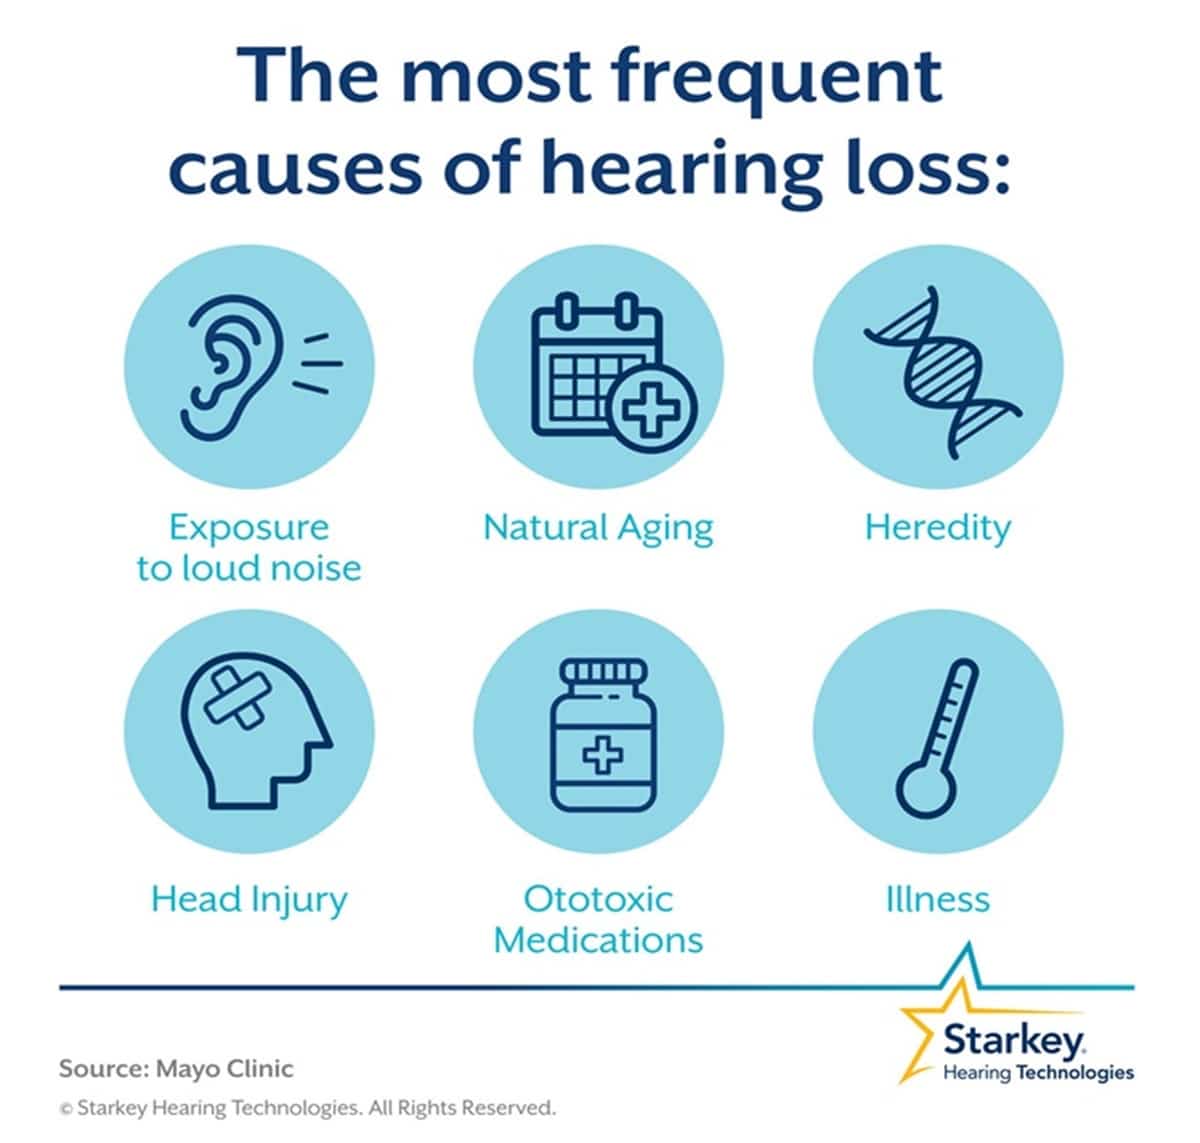 What are the most frequent causes of hearing loss?